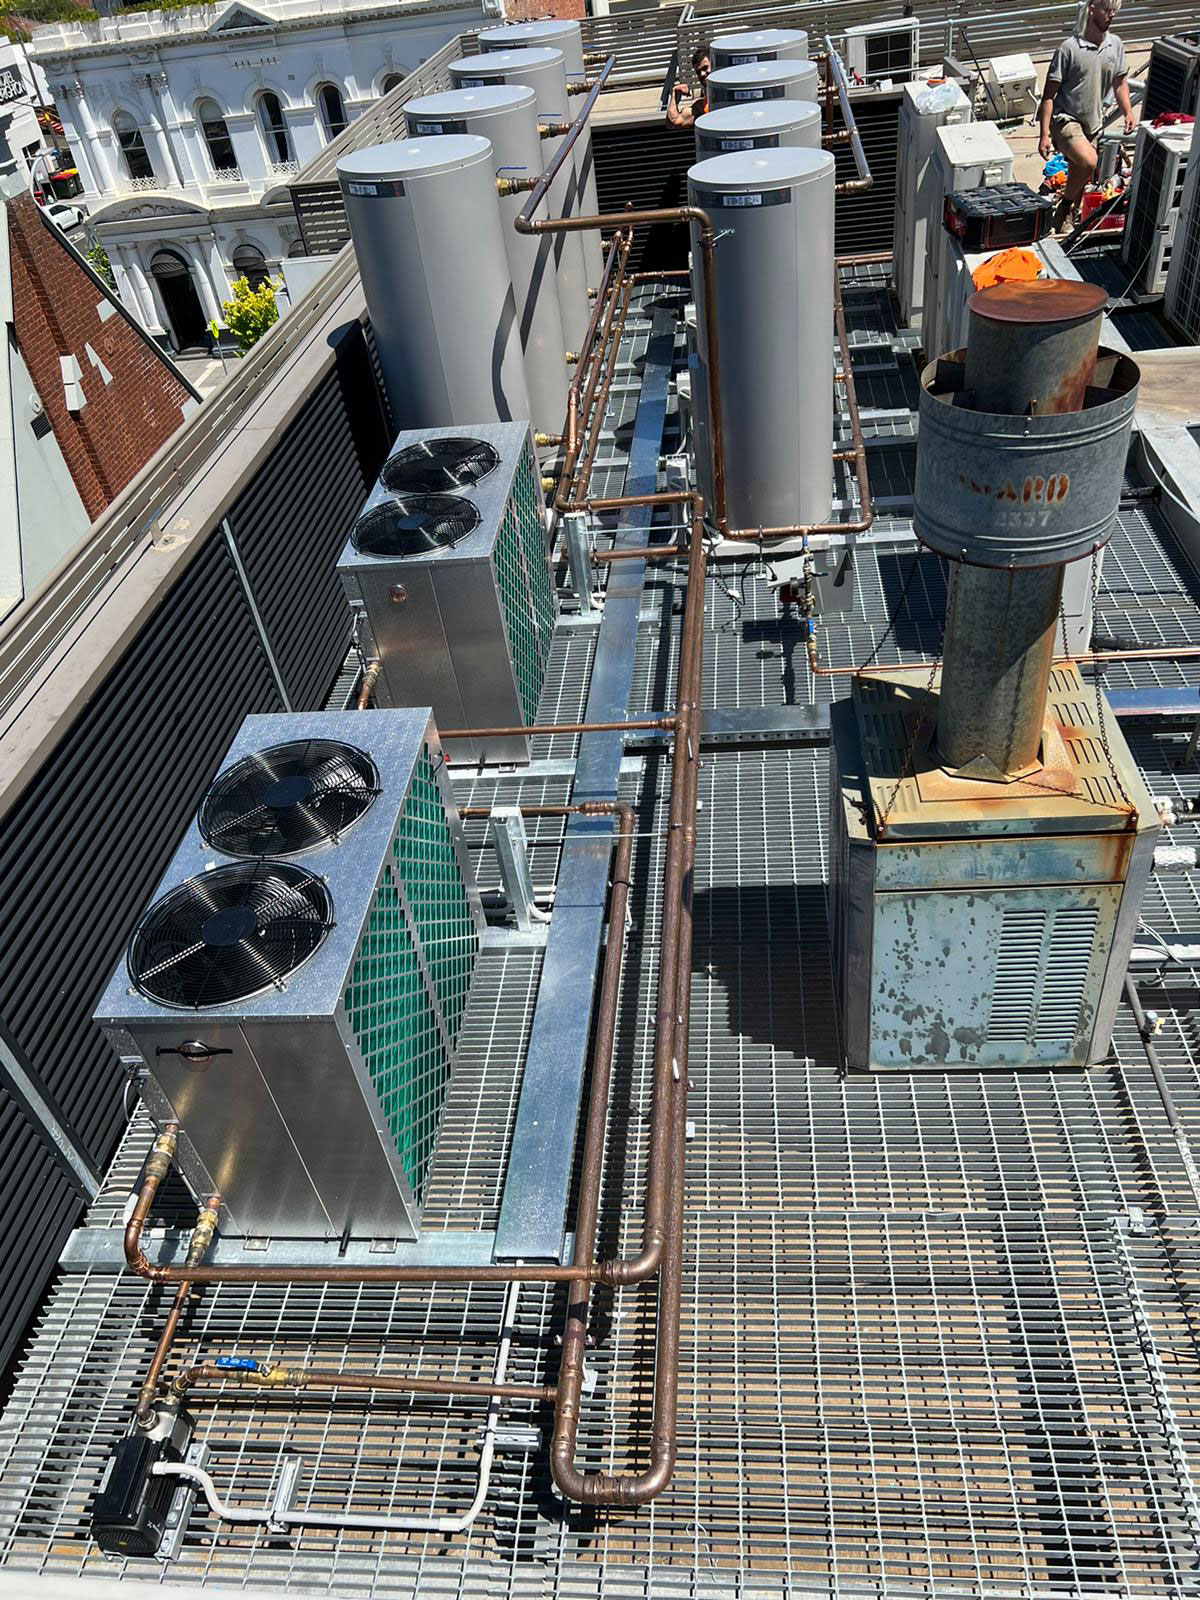 Rheem Commercial case study: Hot water solution for The Brighton on Bay | Rheem Commercial delivers hot water solution for 76 apartments